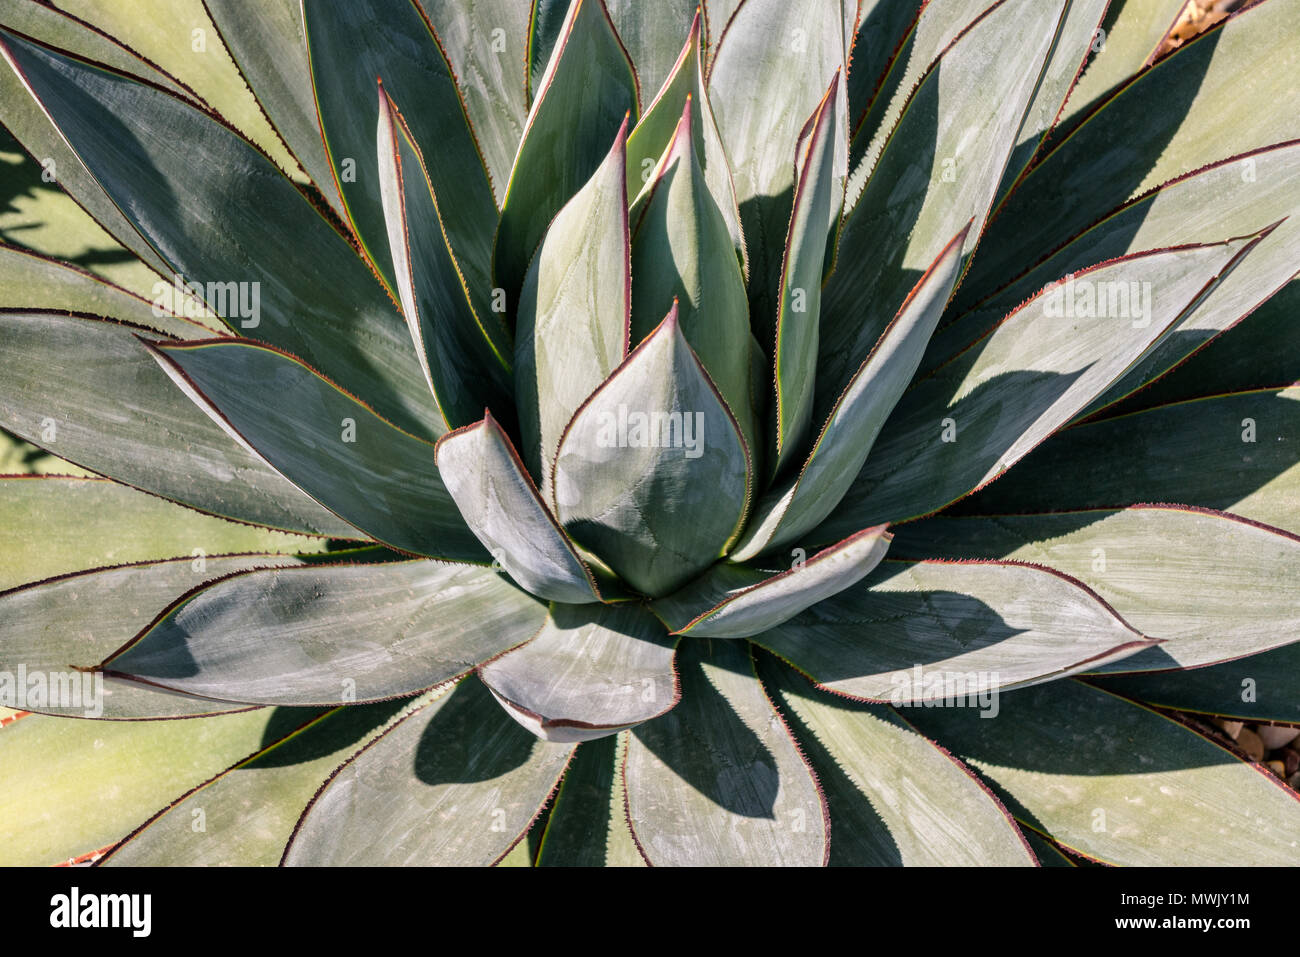 Images of succulents and different flowering plants found on Balboa Island, CA. Stock Photo